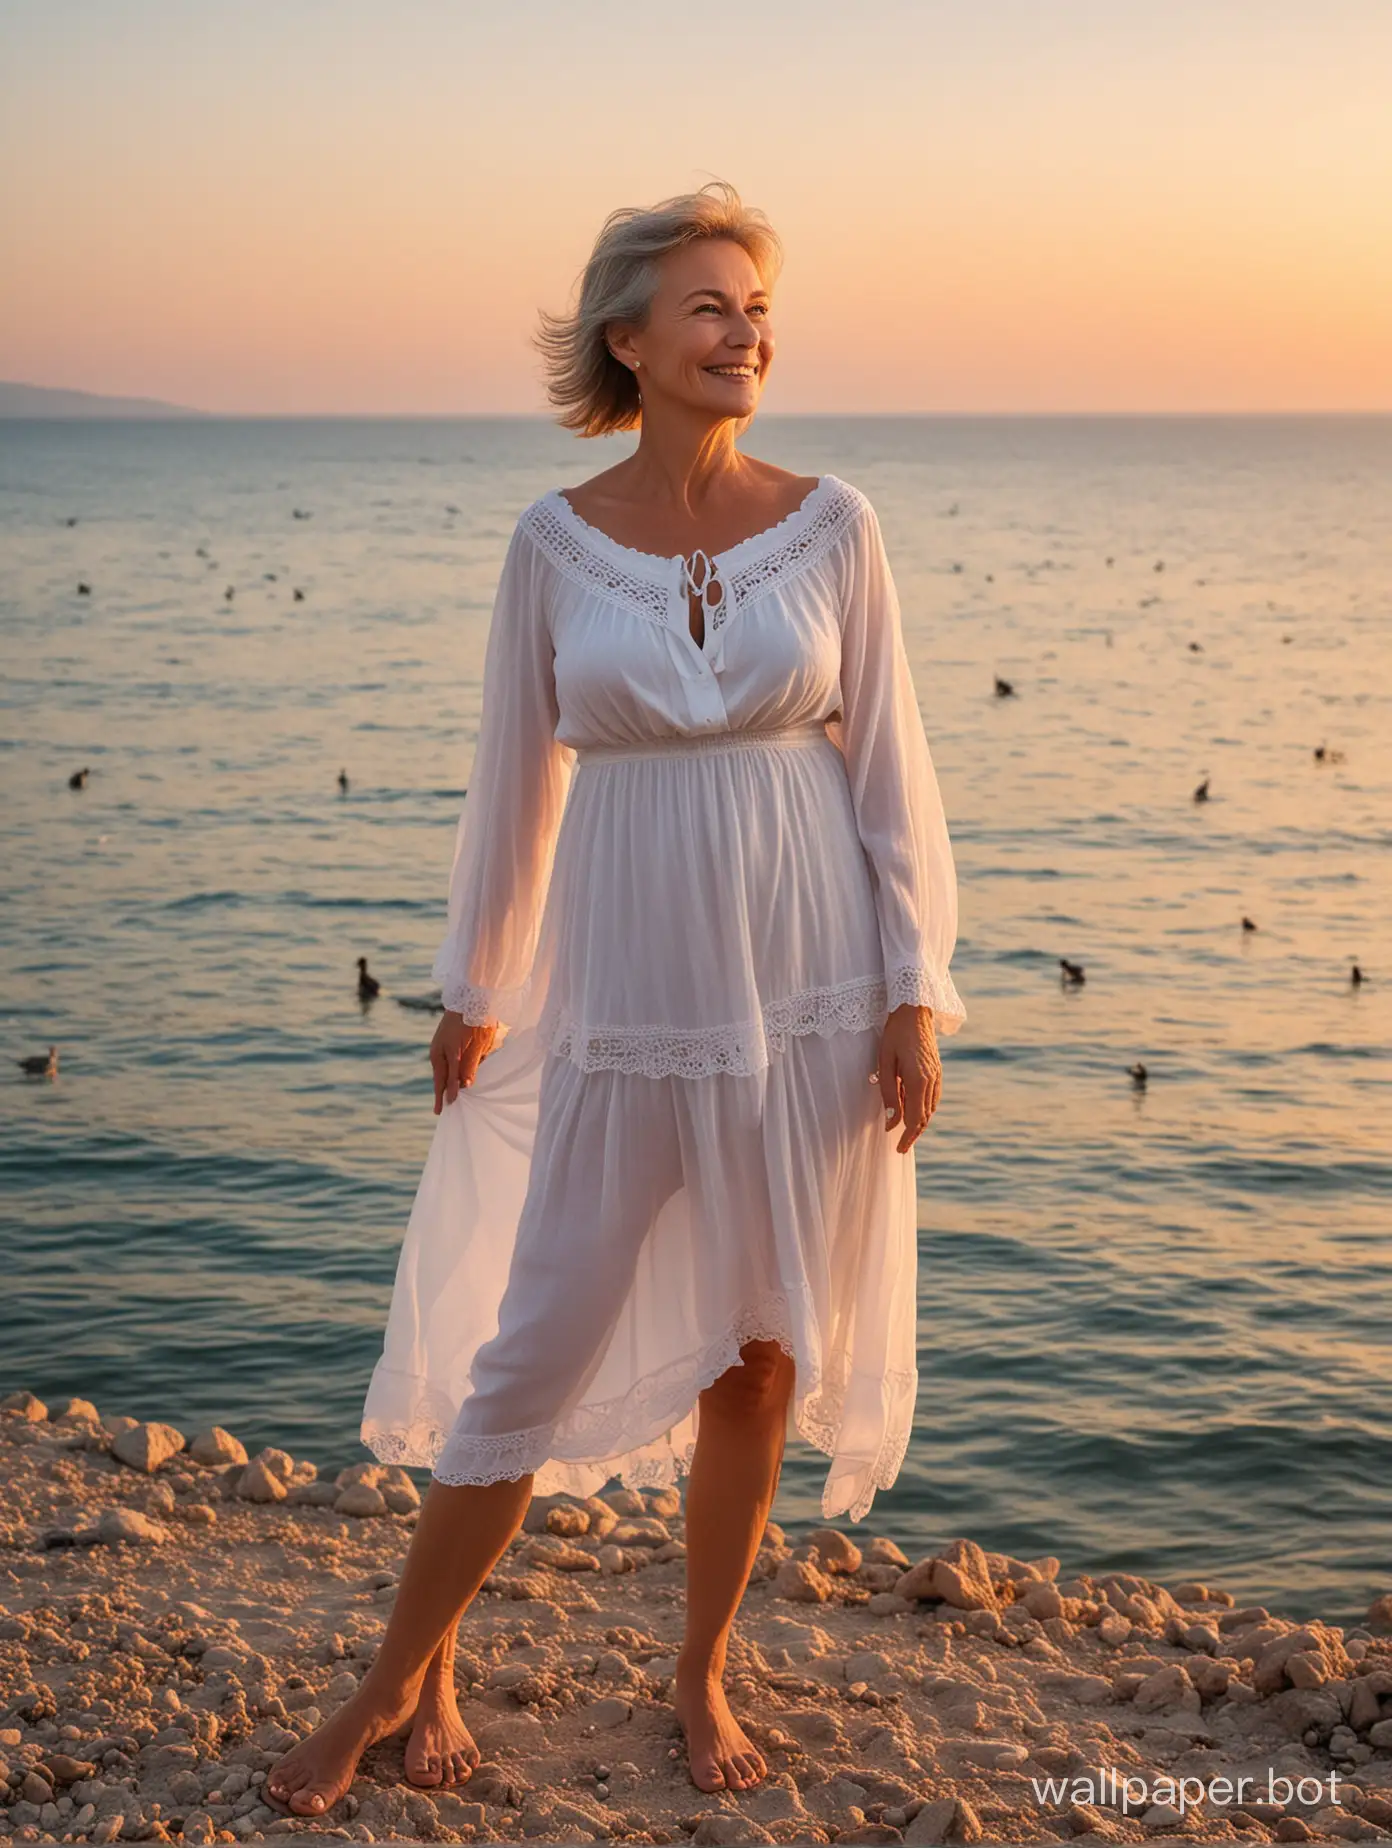 Elderly-Russian-Woman-Posing-by-the-Crimean-Sea-at-Sunset-with-Birds